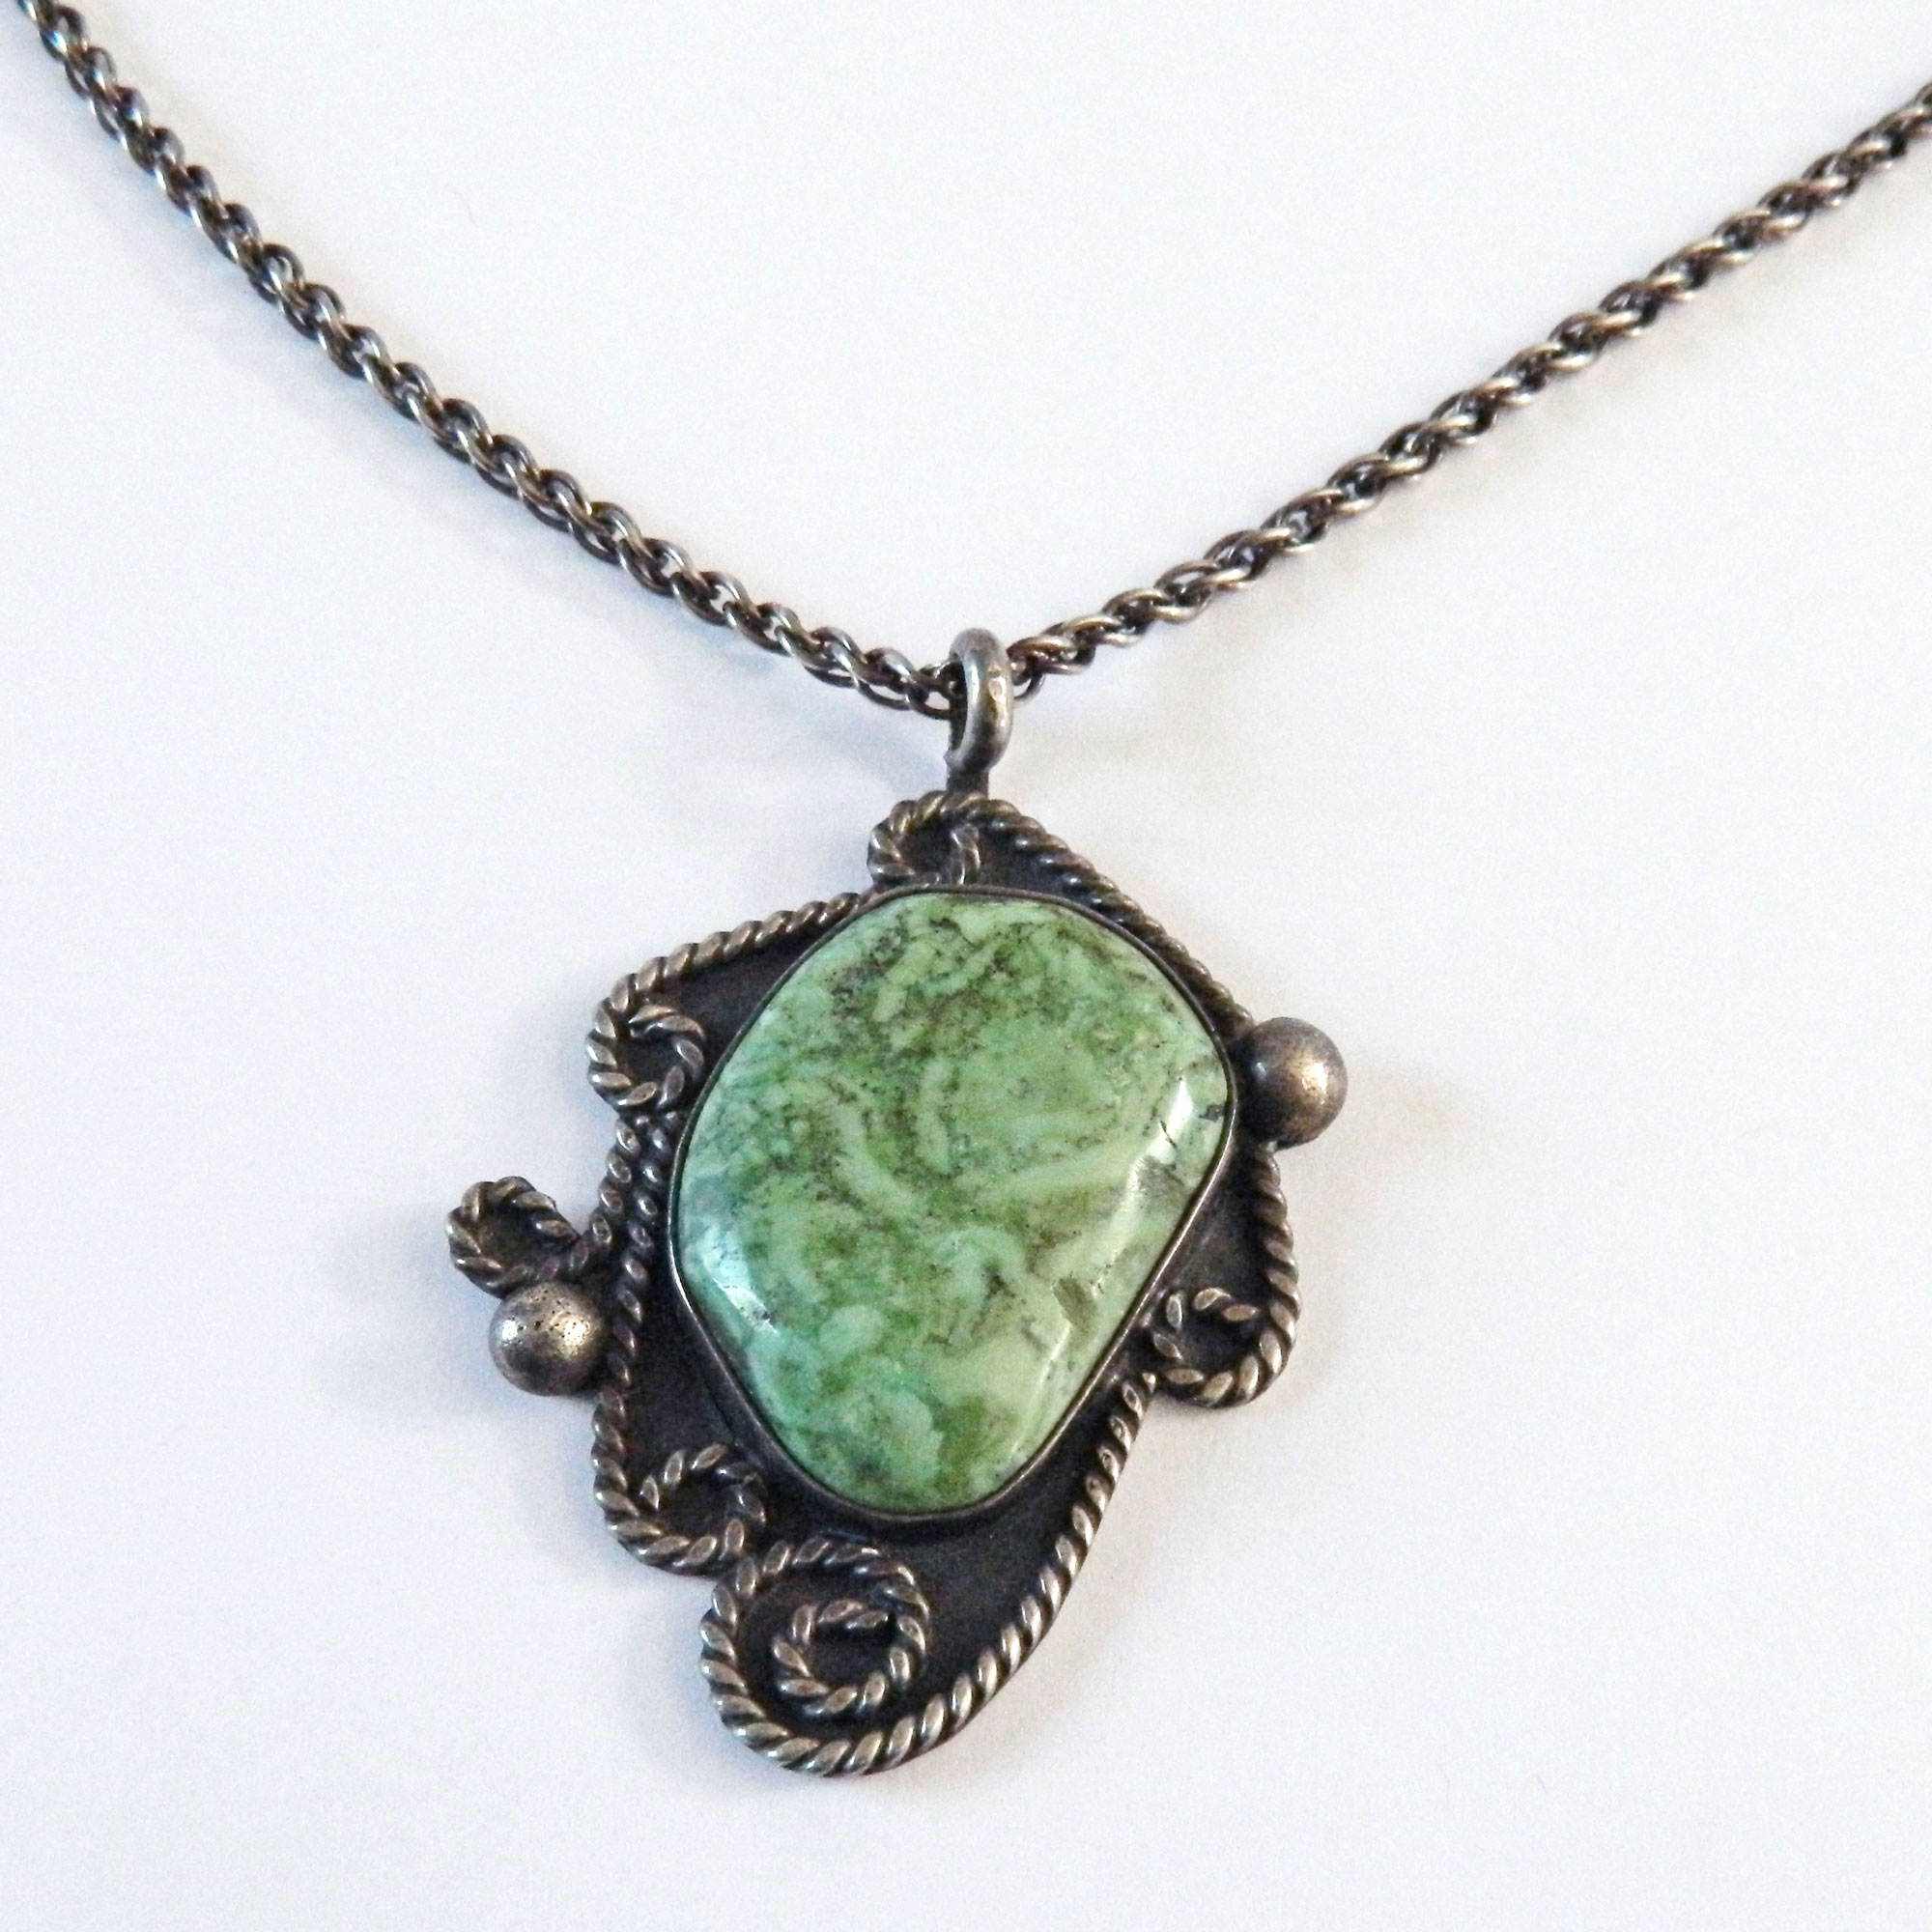 Green turquoise pendant necklace